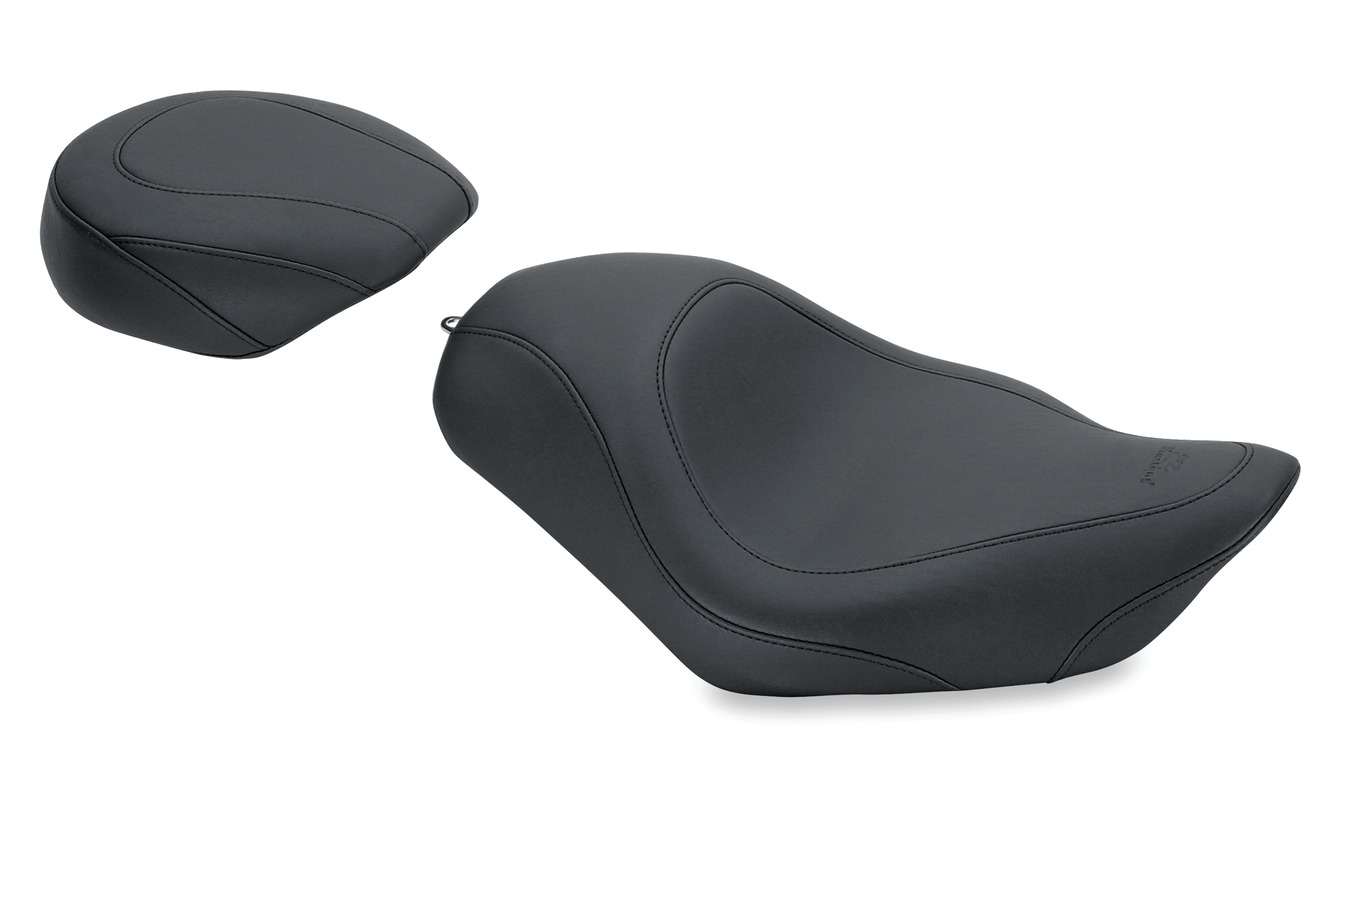 Wide Tripper™ Solo Seat for Harley-Davidson Sportster 2004-